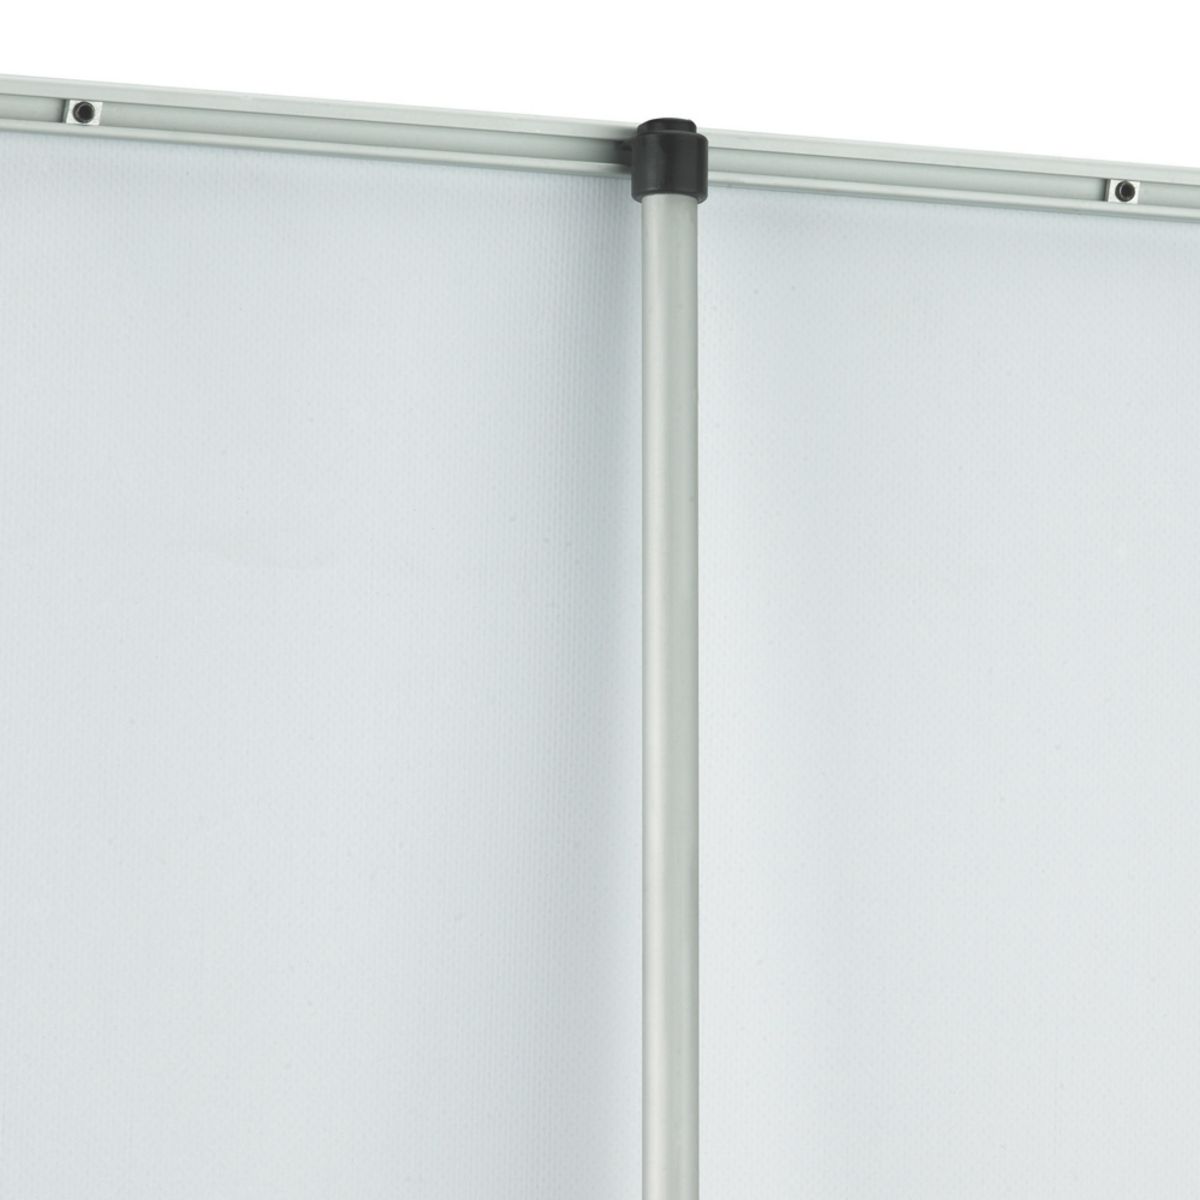 Sigma Roller Banner Stand 4